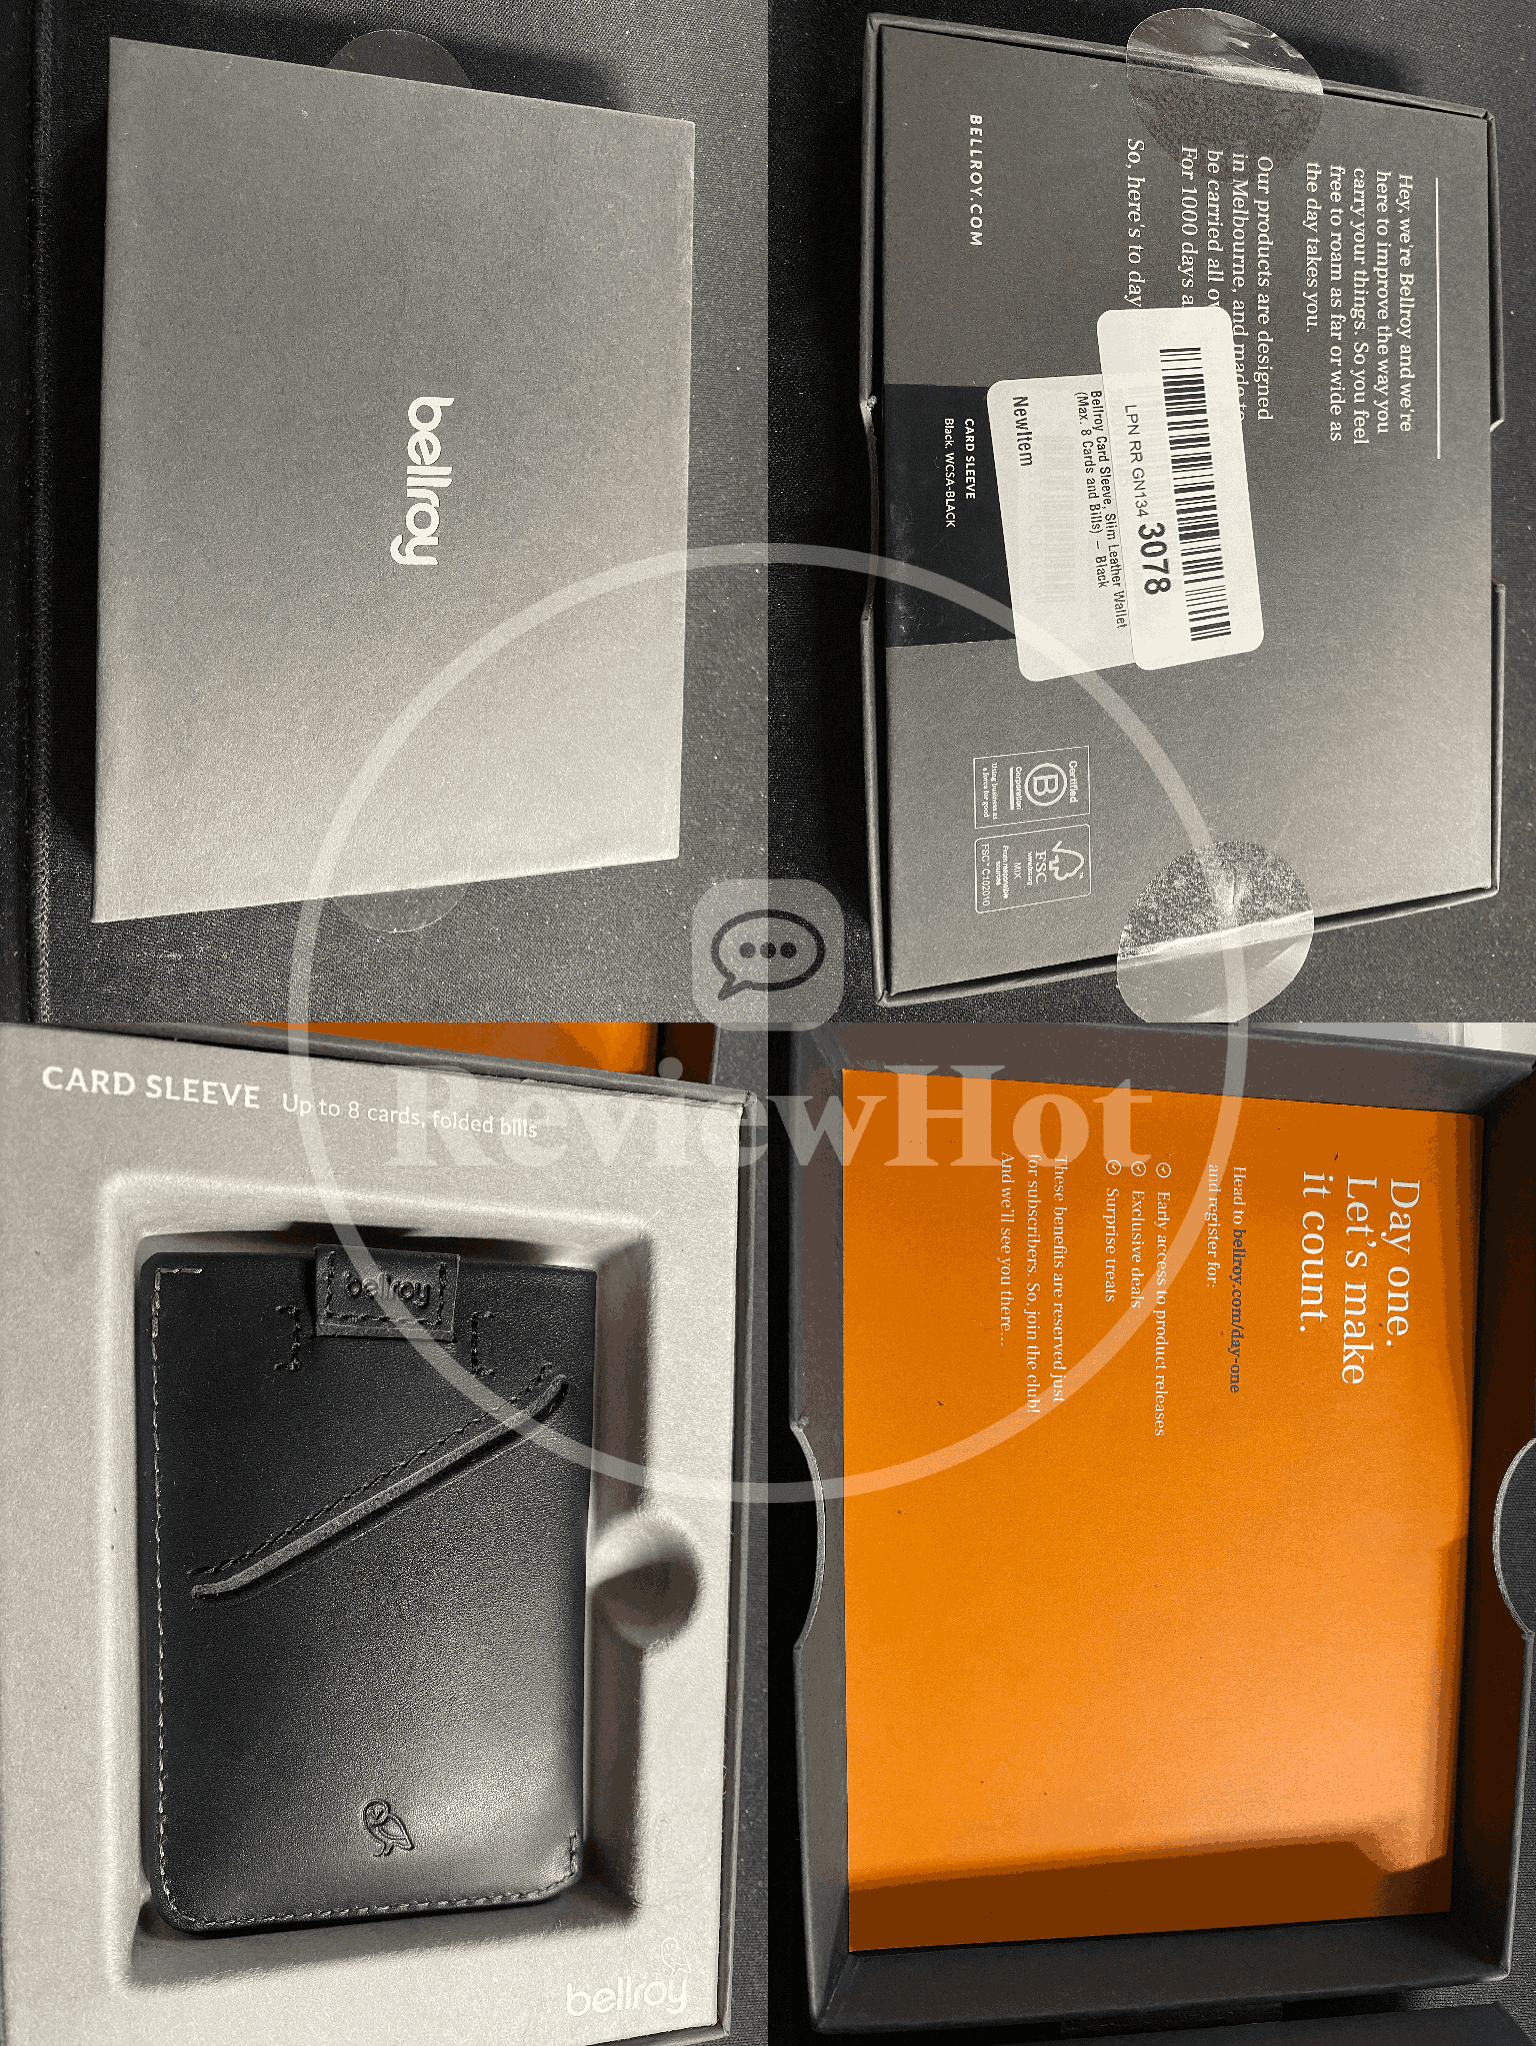 Bellroy card wallet unboxing